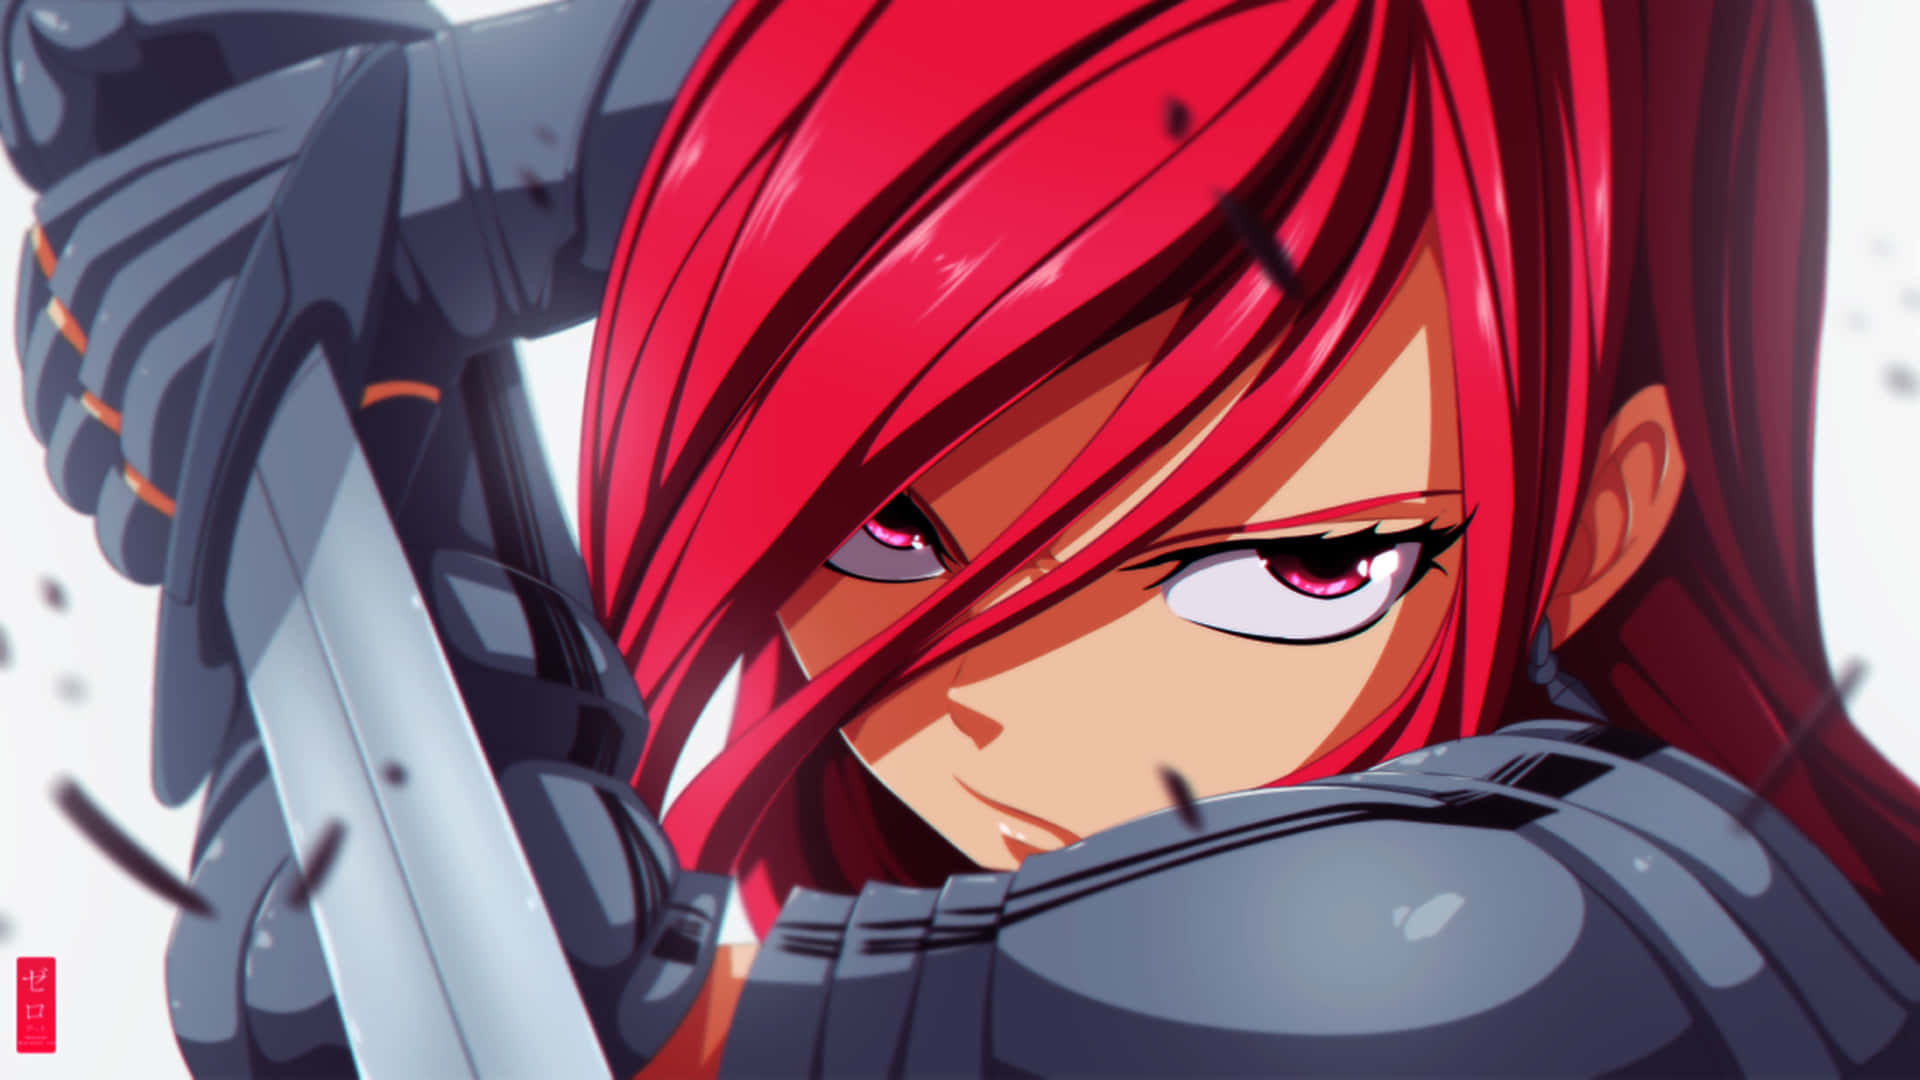 Erza Scarlet - The Fearsome Mage Wallpaper